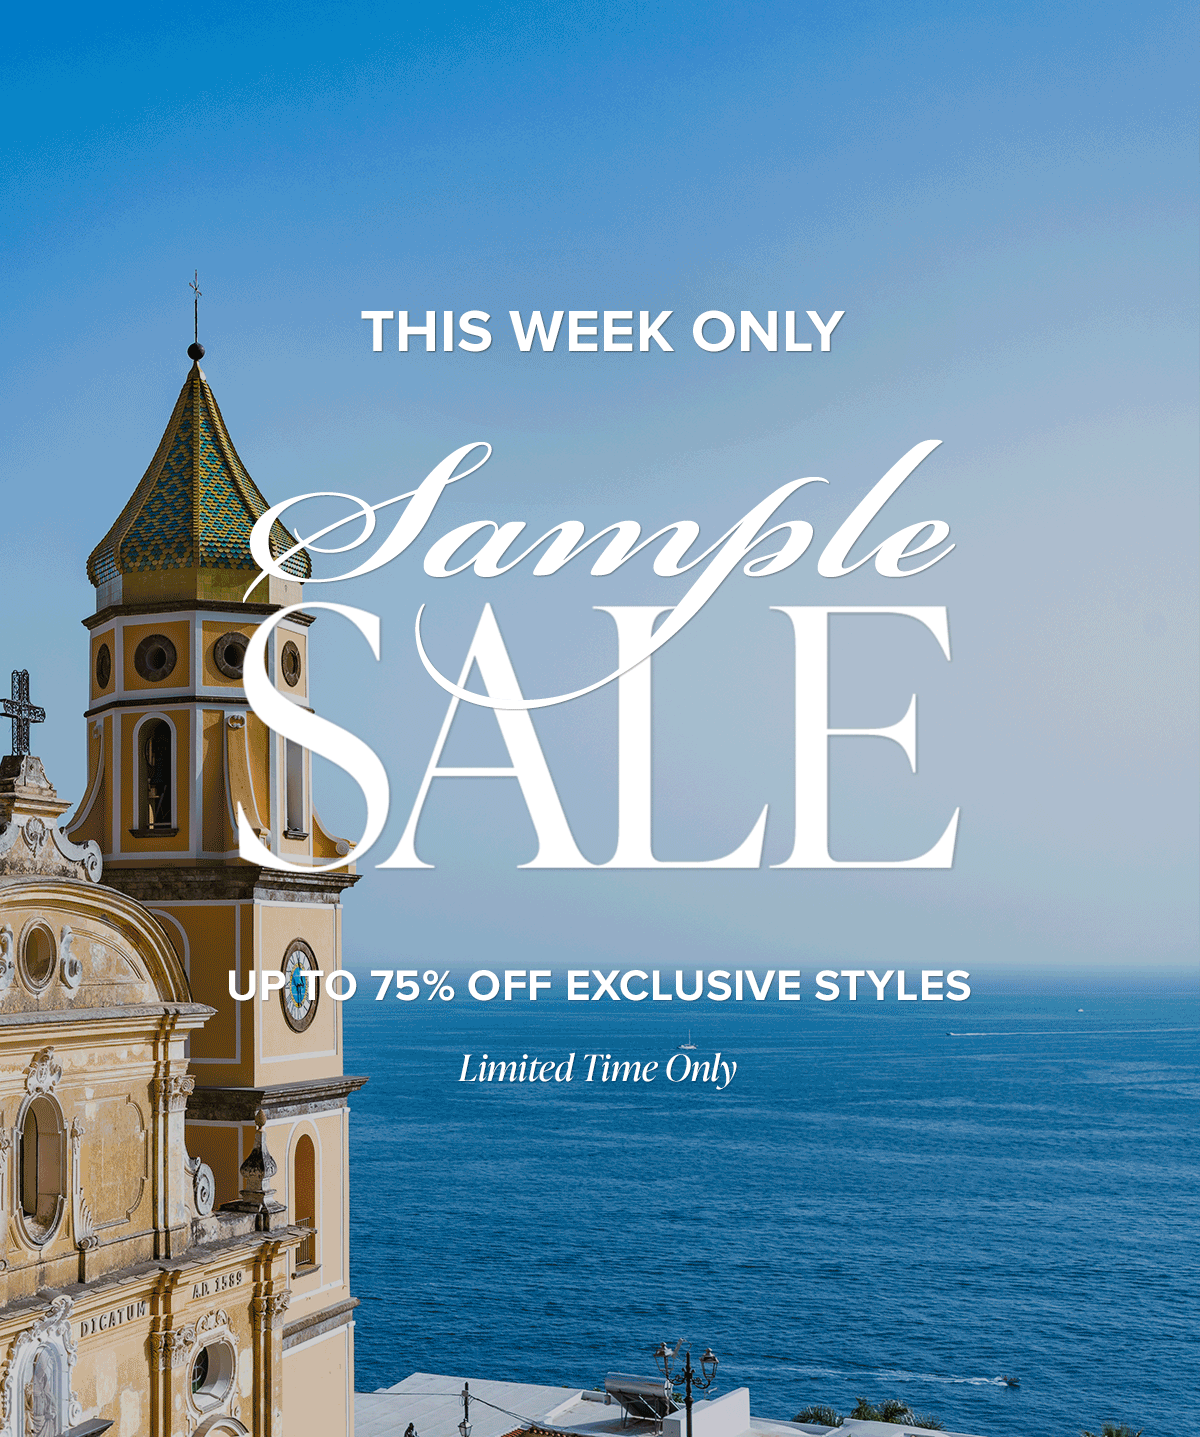 THIS WEEK ONLY: SAMPLE SALE UP TO 75% OFF EXCLUSIVE STYLES - Limited Time Only